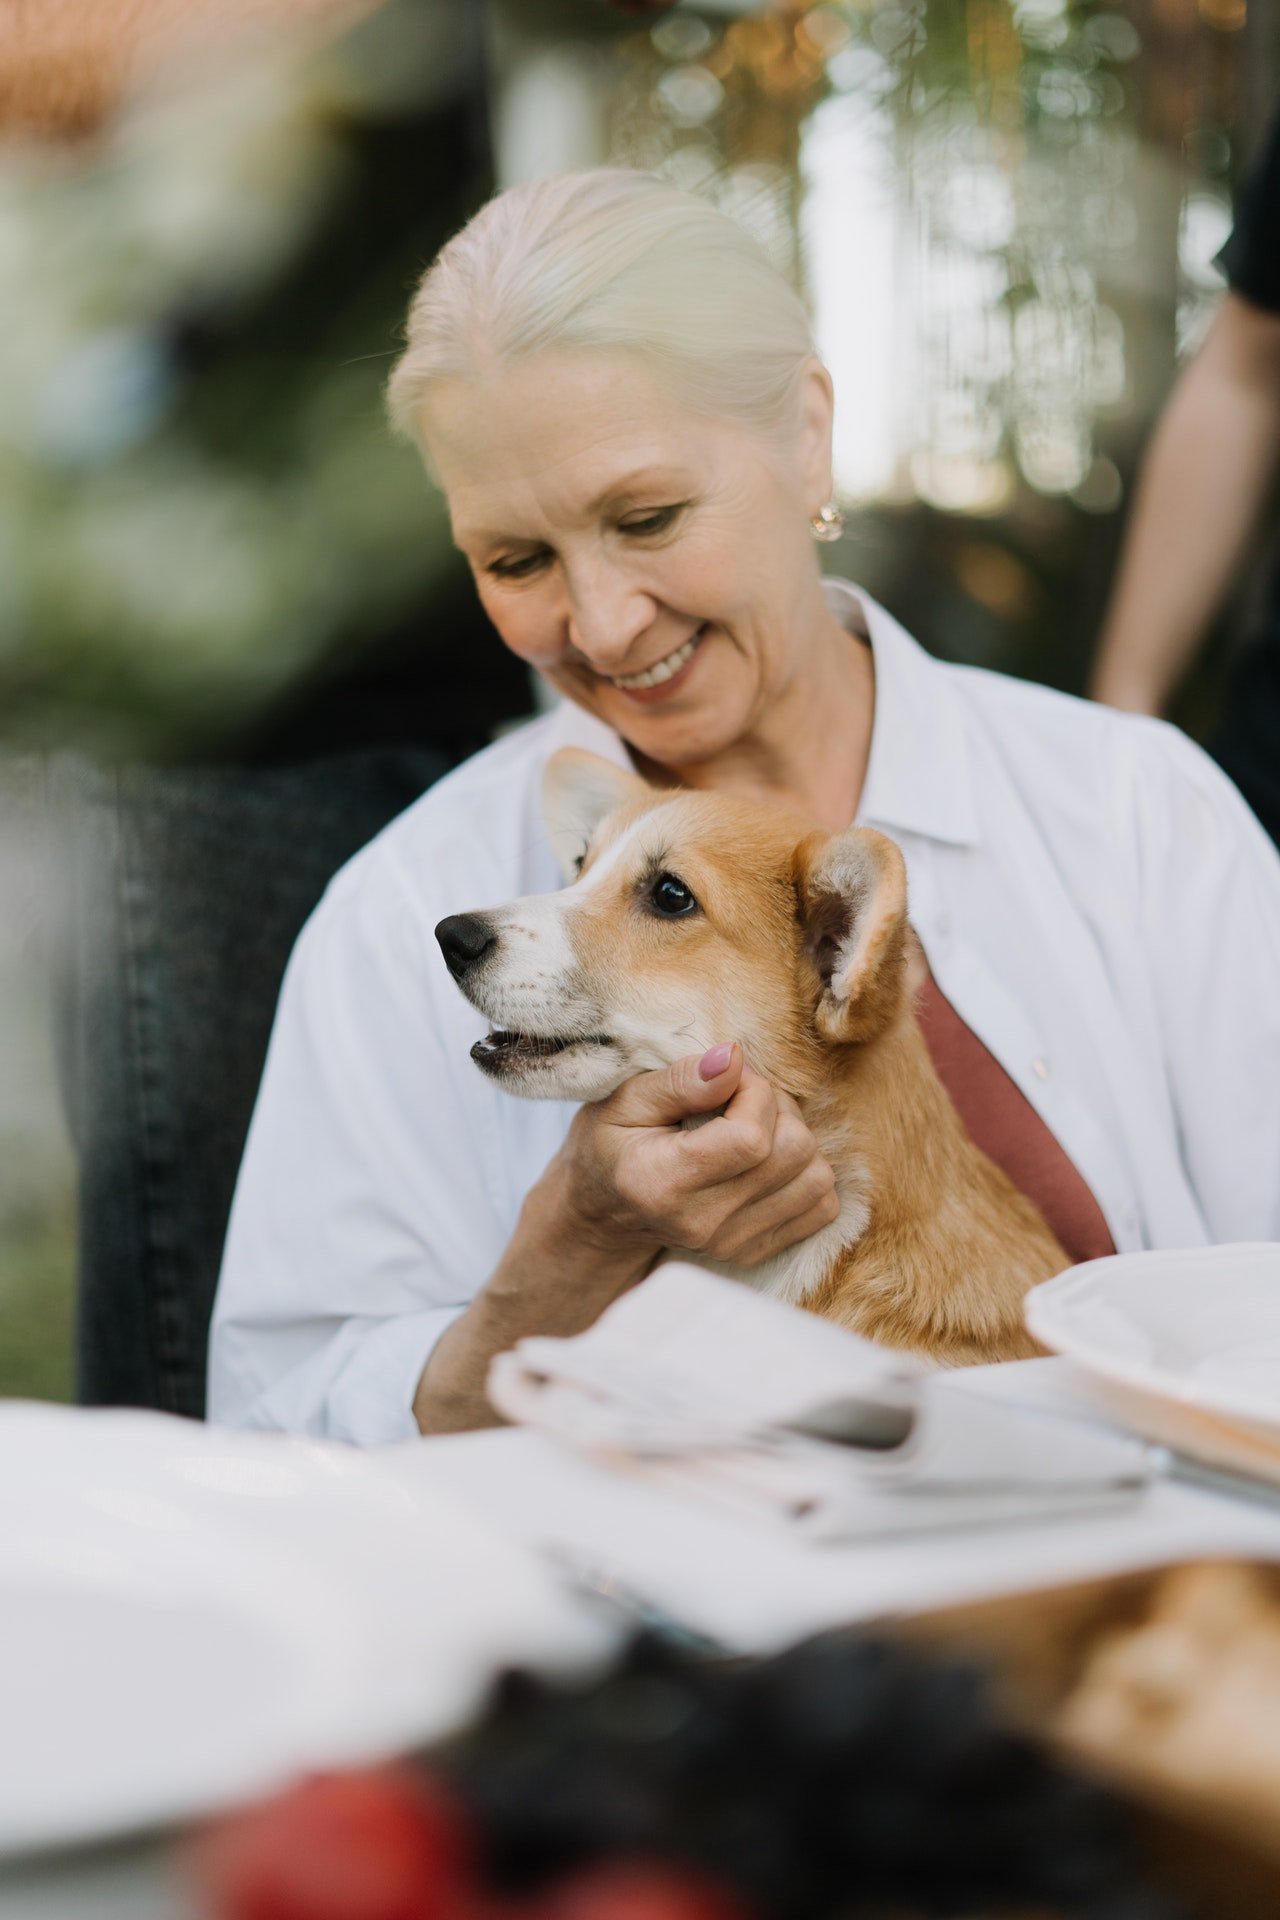 Carla's only companion was a big dog named Rocky with which she spent all her time | Source: Pexels